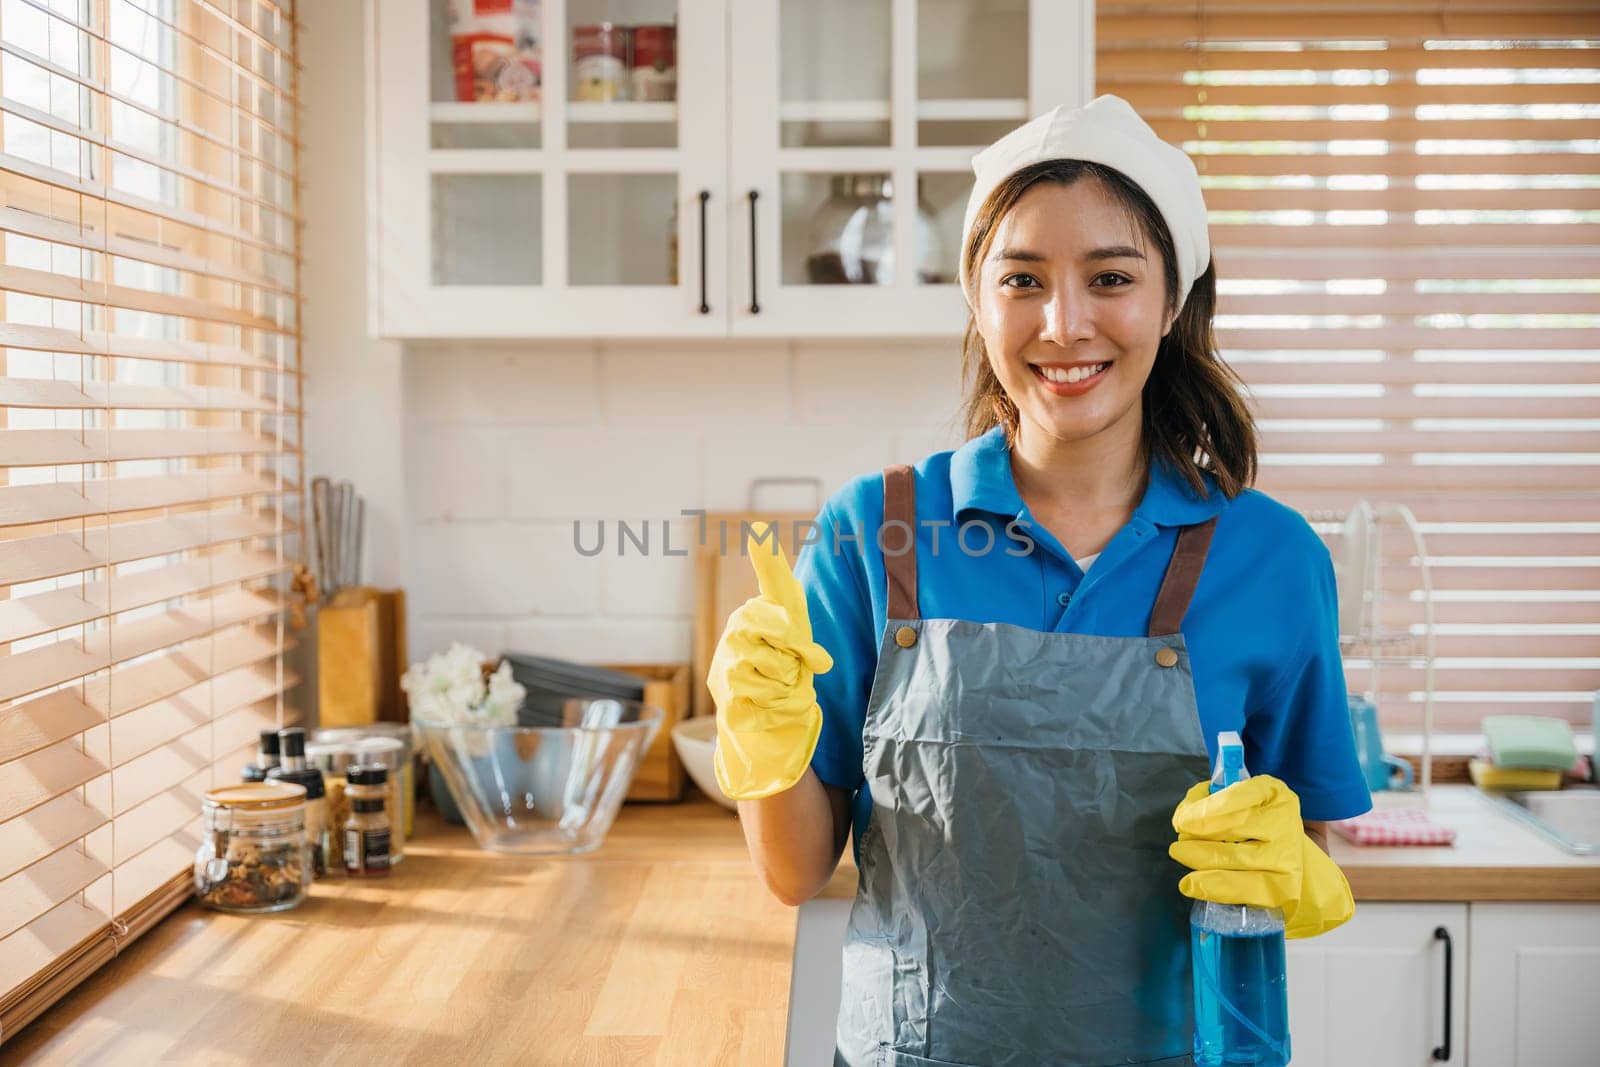 Ready for home cleaning smiling woman in uniform holds spray bottle. Emphasizing housekeeping and hygiene. Clean disinfect home care. maid with liquid.